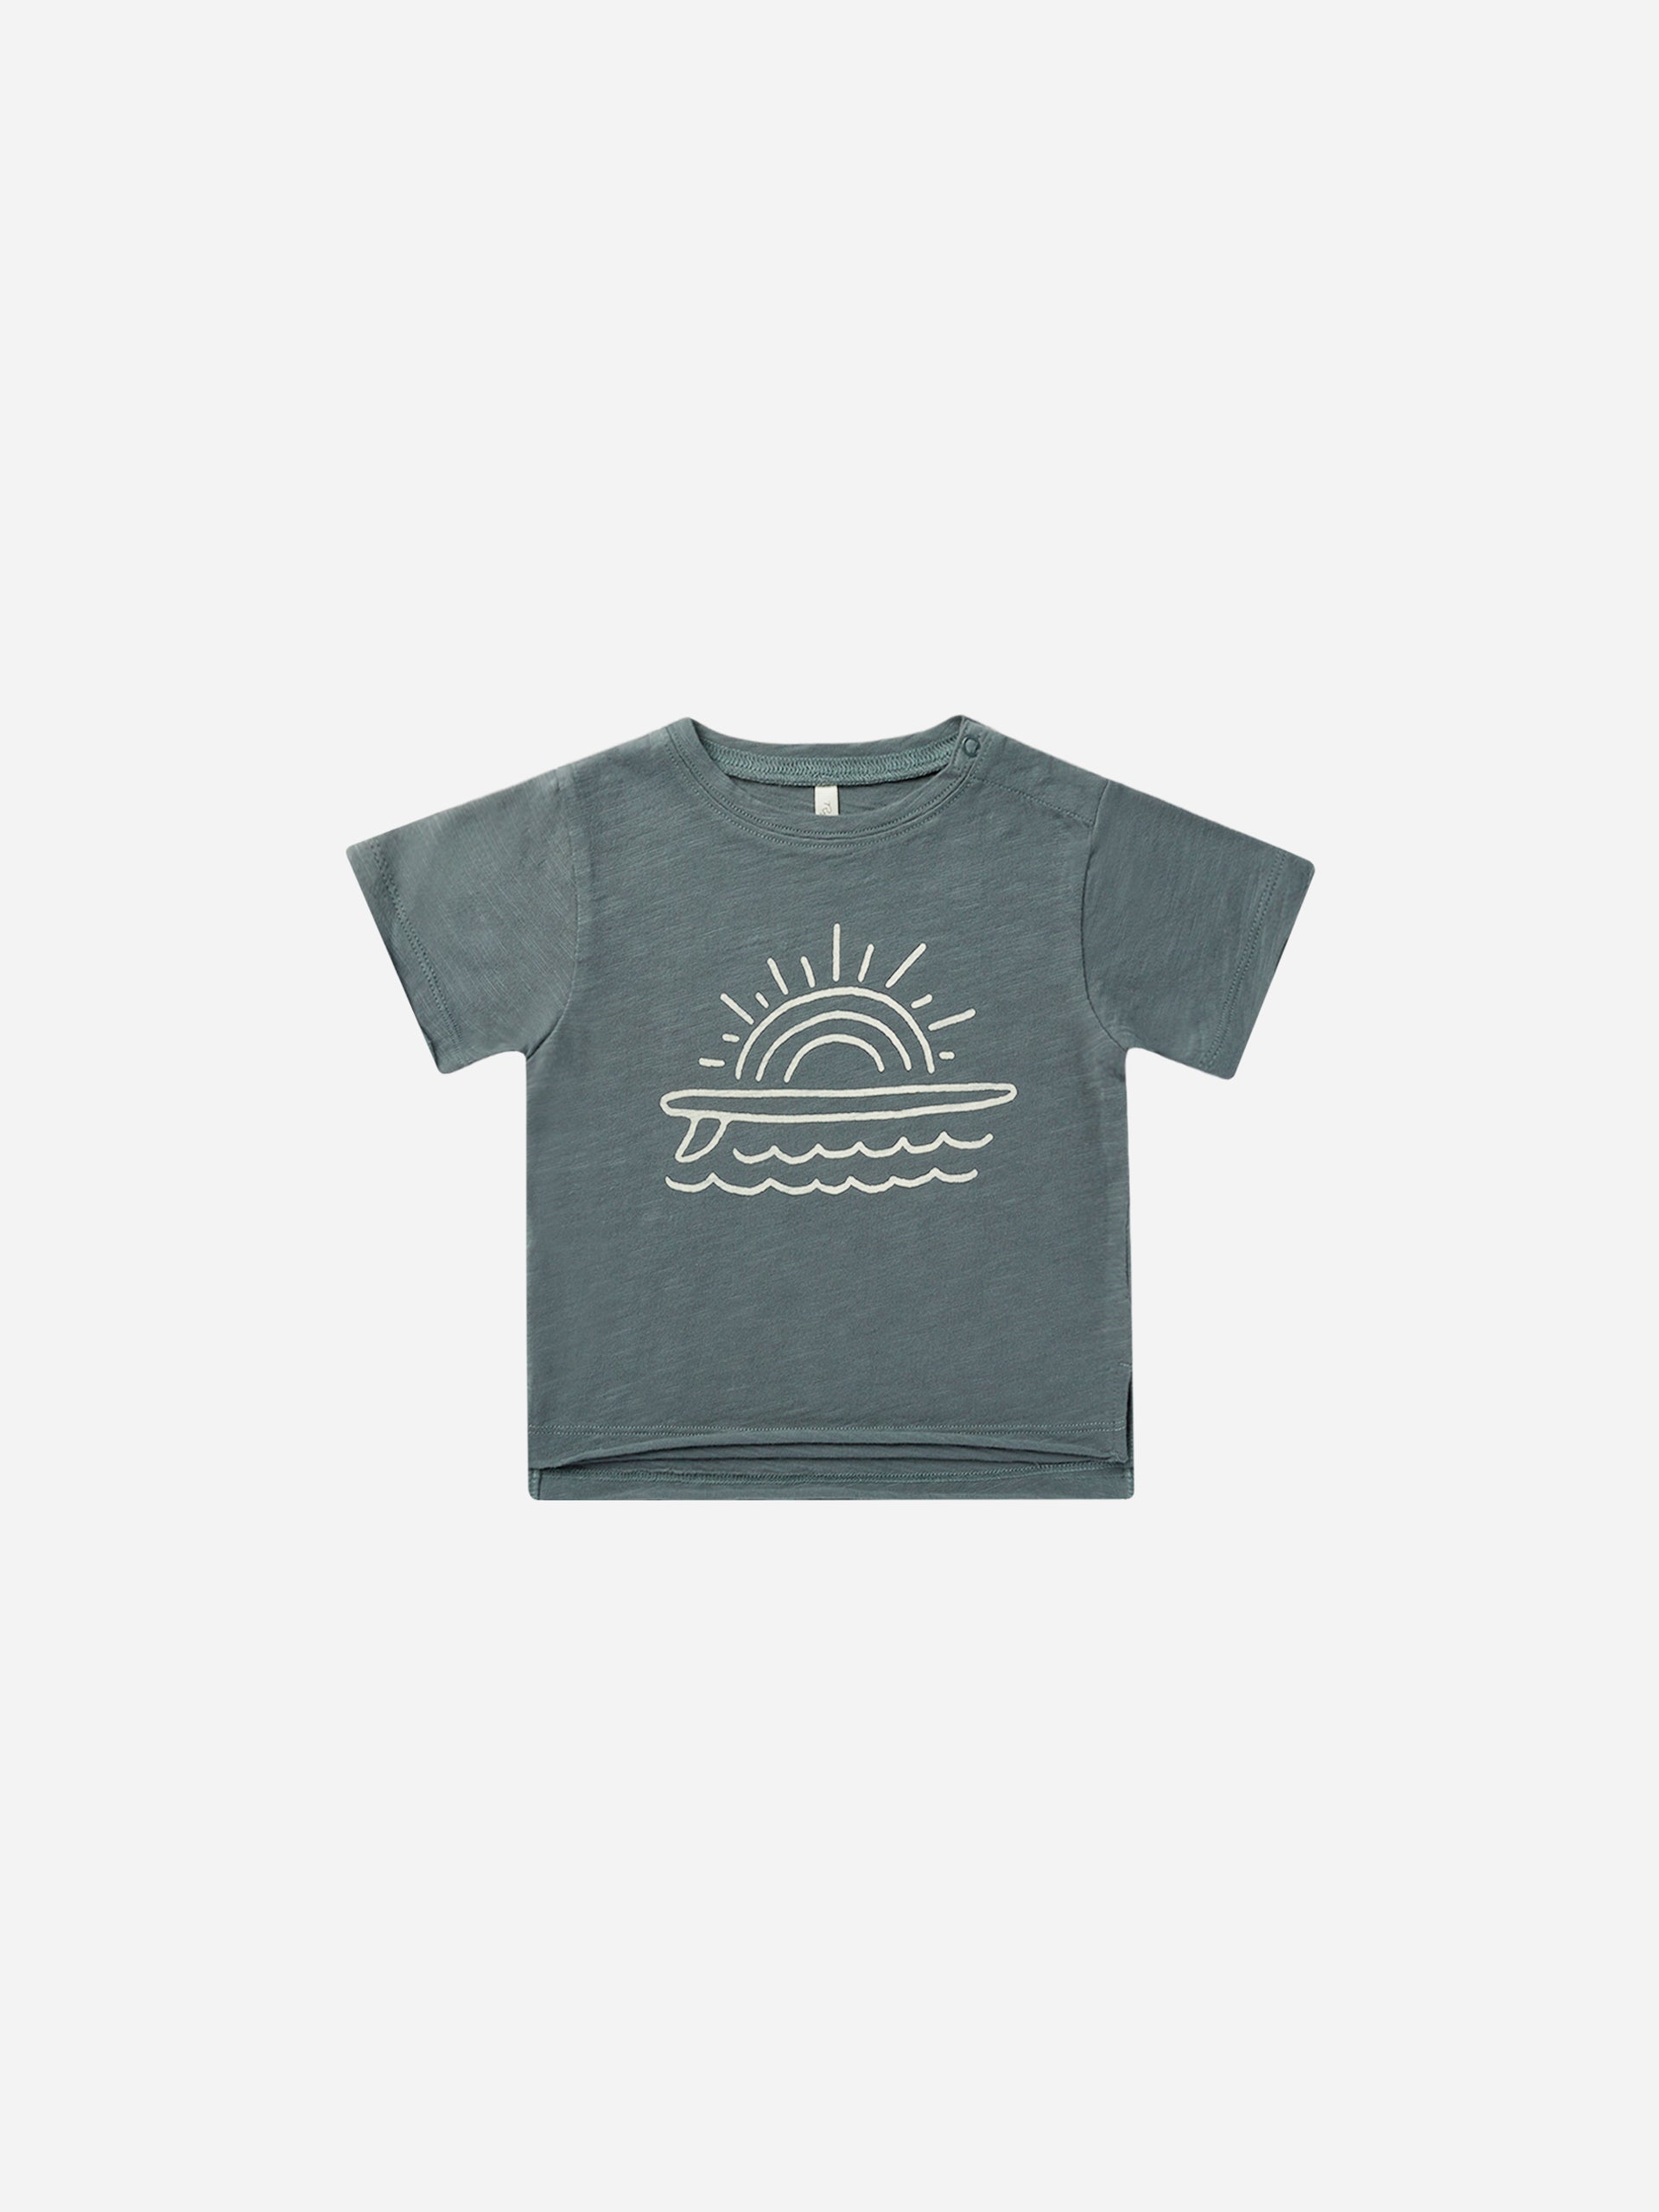 Raw Edge Tee || Indigo - Rylee + Cru | Kids Clothes | Trendy Baby Clothes | Modern Infant Outfits |